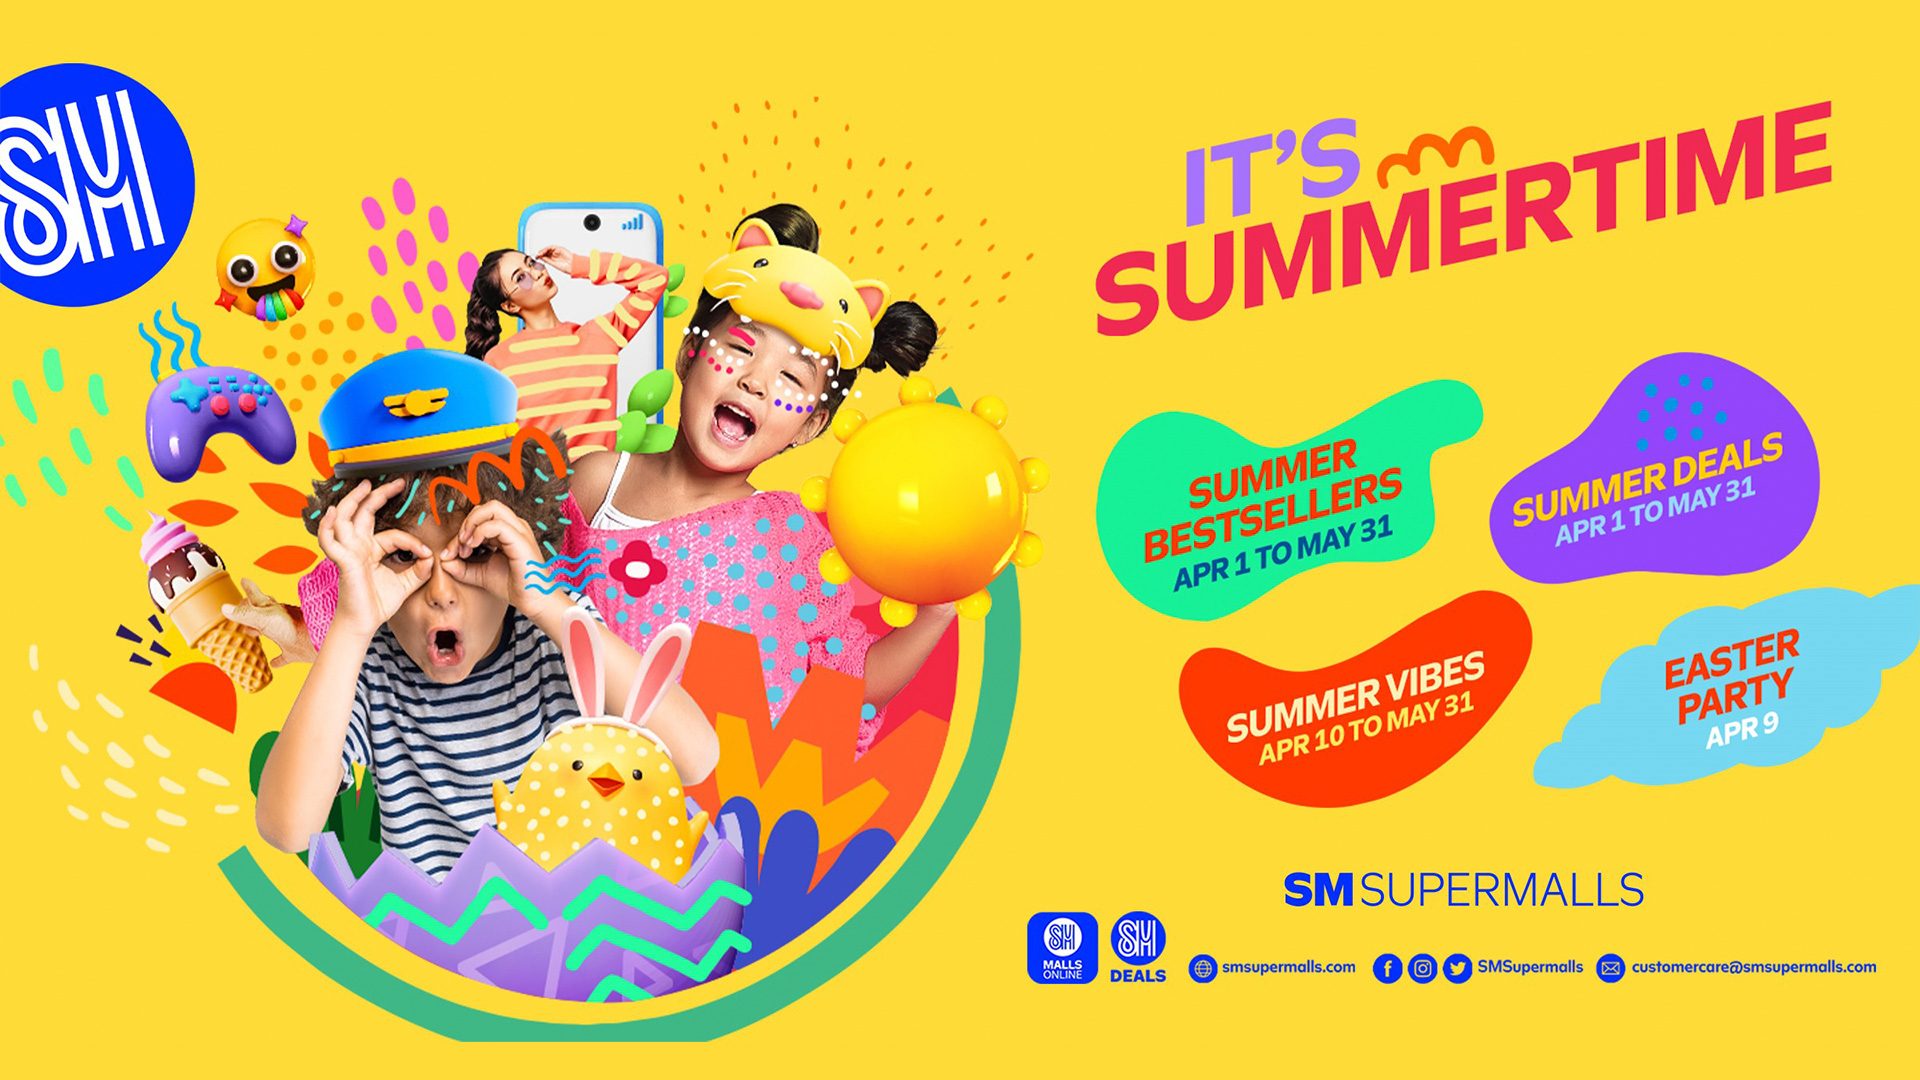 LOOK: It’s summertime at SM Supermalls